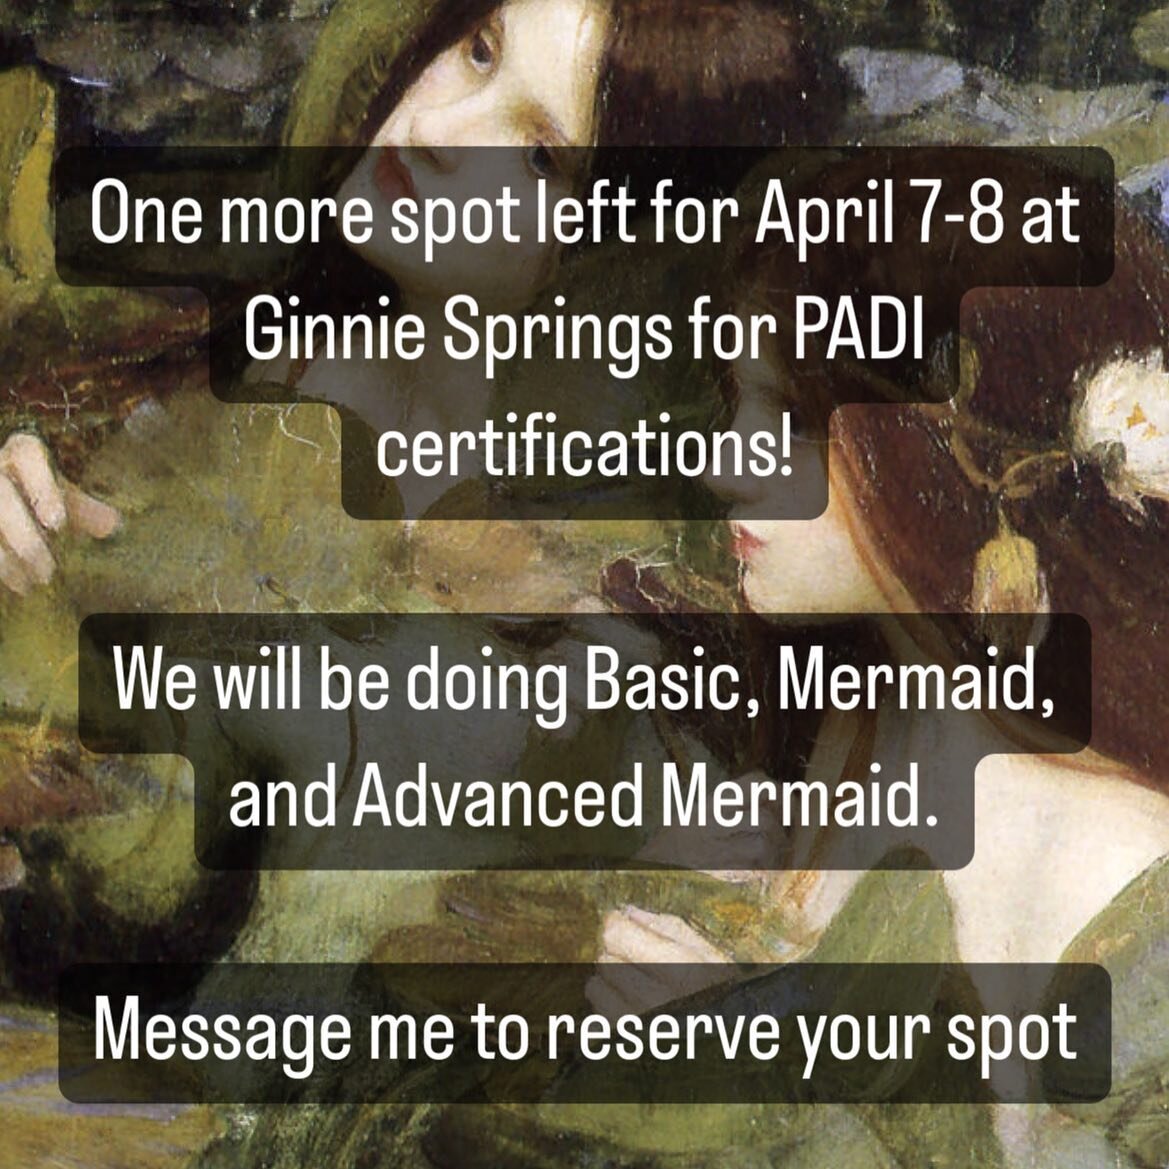 Underwater photos and video included! You don&rsquo;t have to be from Florida to join in. If you want your PADI Mermaid certification, this is a great opportunity  to do that and get some great content for your social media.#padimermaid #mermaidlesso